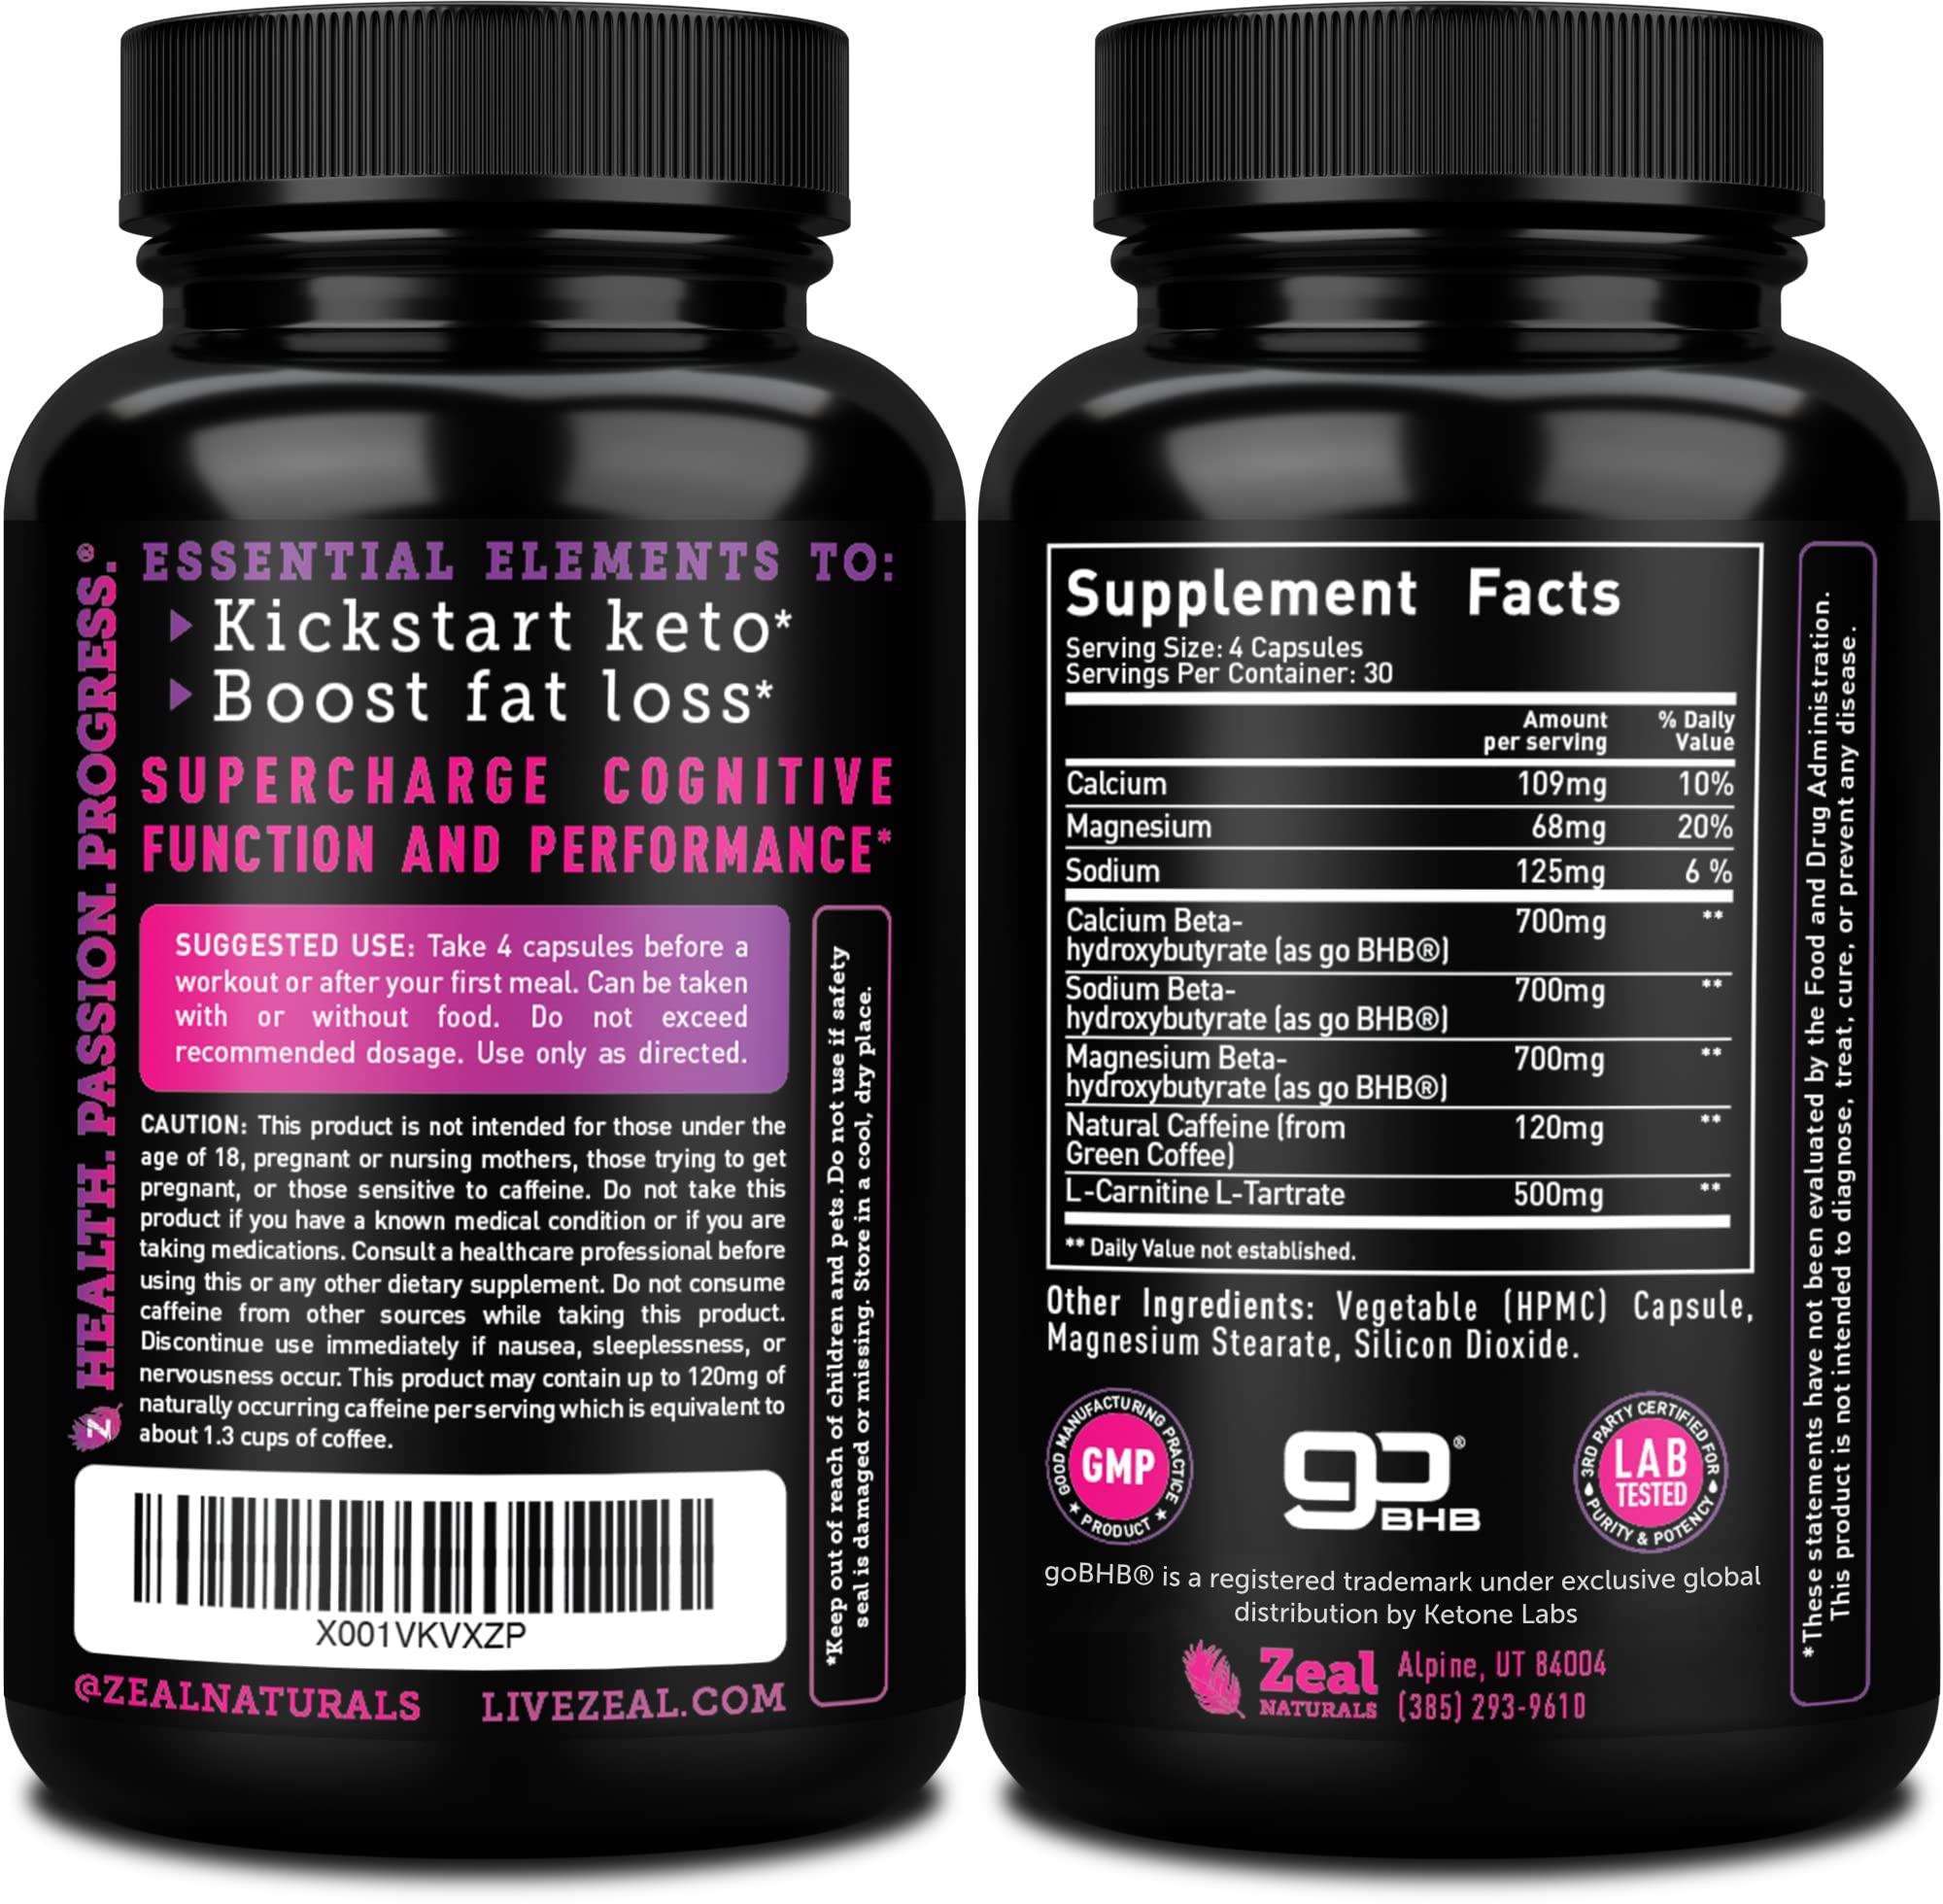 Looking to Buy Oneshot Keto Pills Near You. Read This First